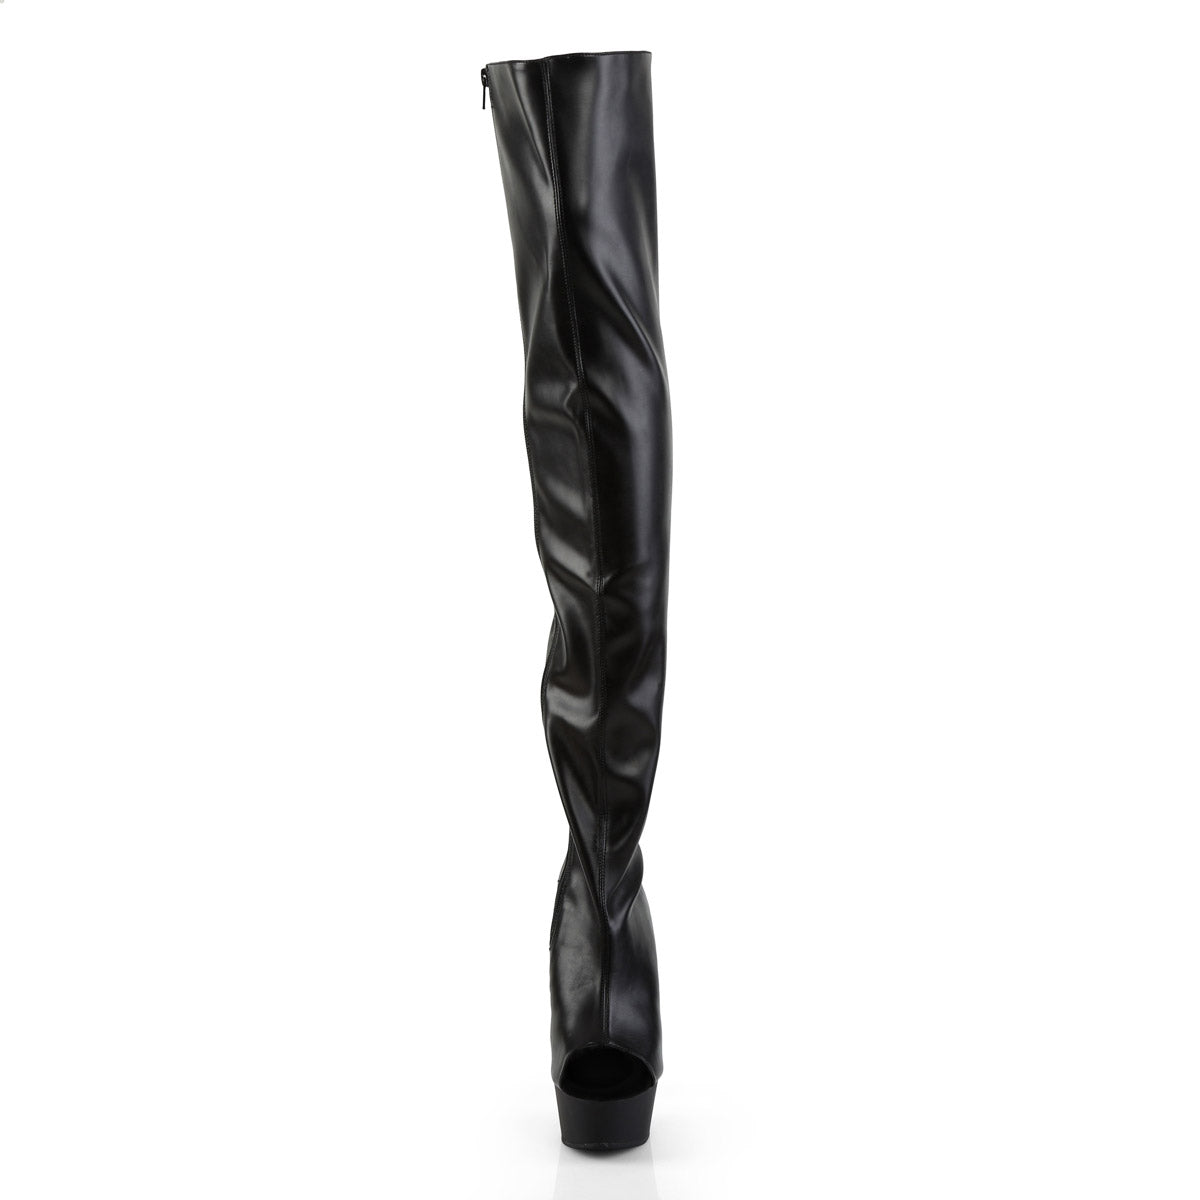 Lace Up Back Thigh High Zip Side Platform Stiletto Heel Boots Shoes Pleaser Pleaser DELIGHT/3017